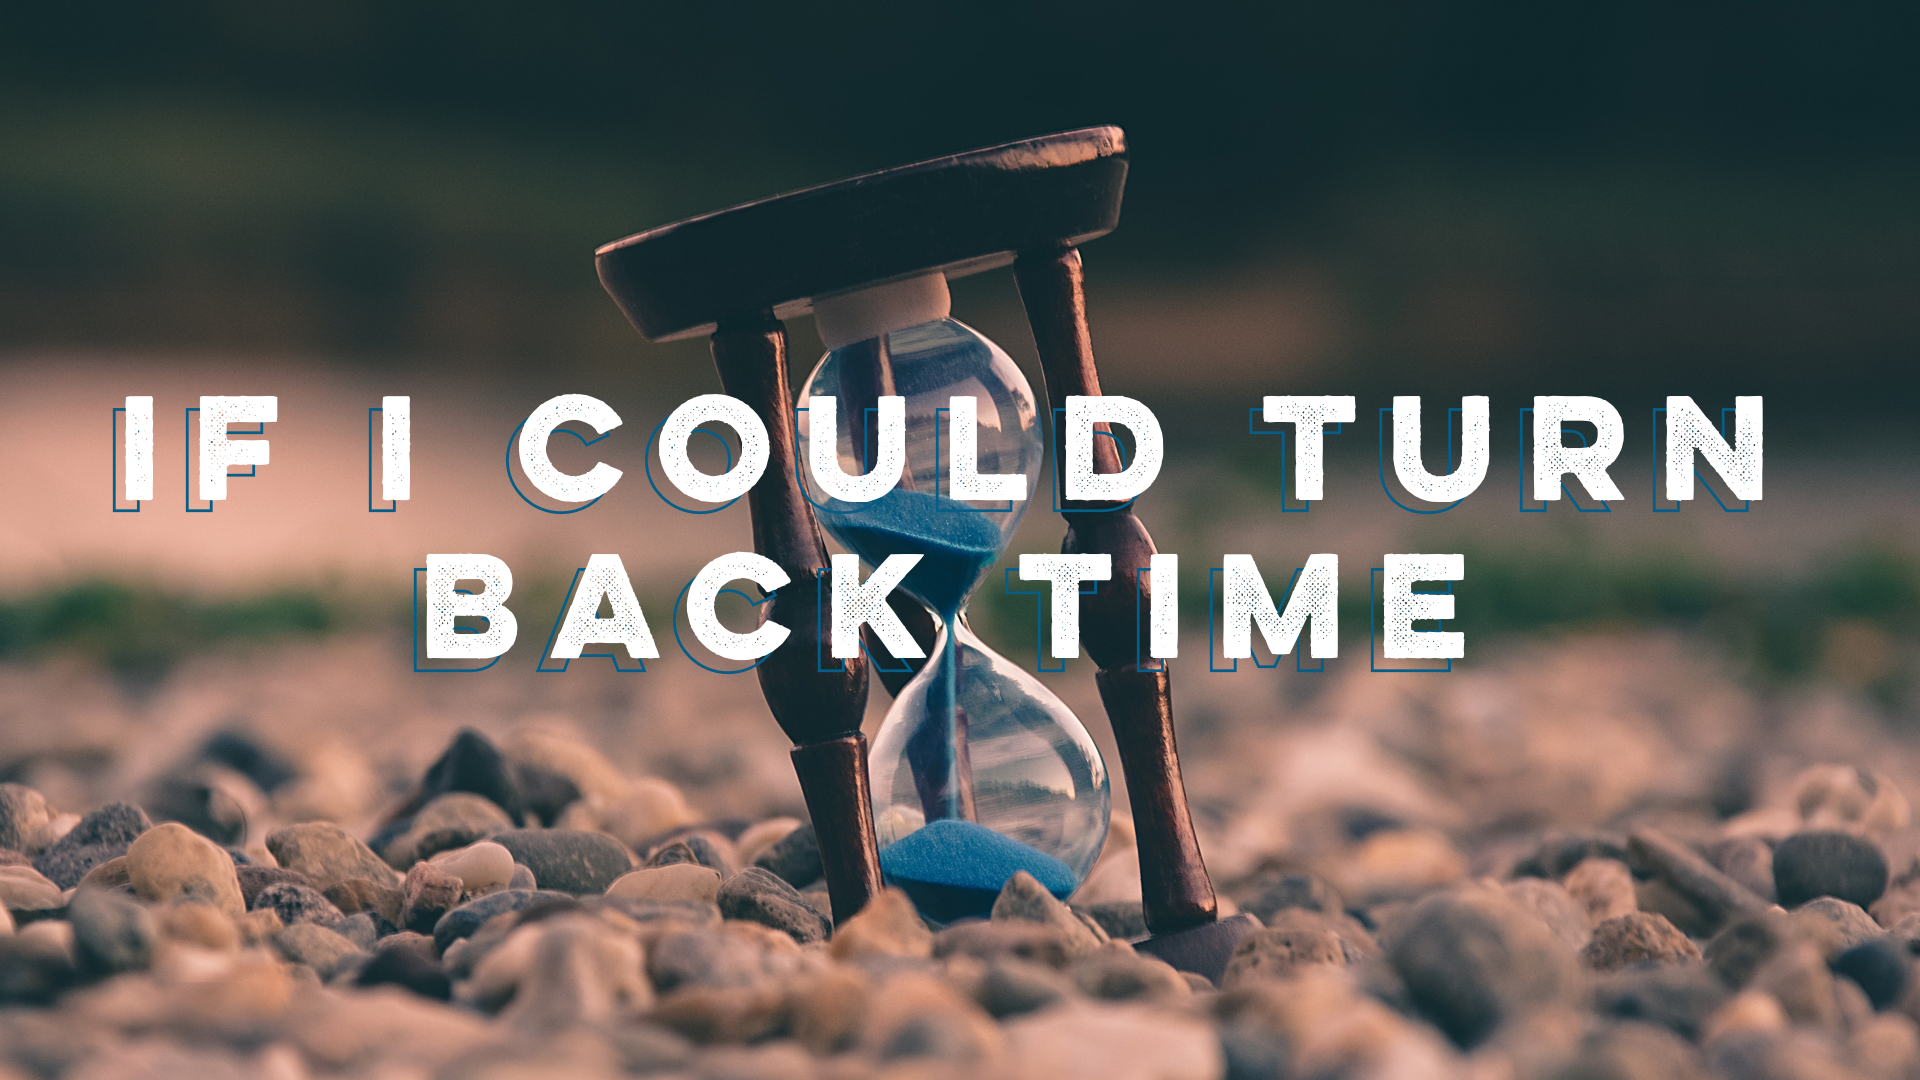 If i could turn back time. Turn back time. Could turn back. Шер if i could turn back time. Time will turning time